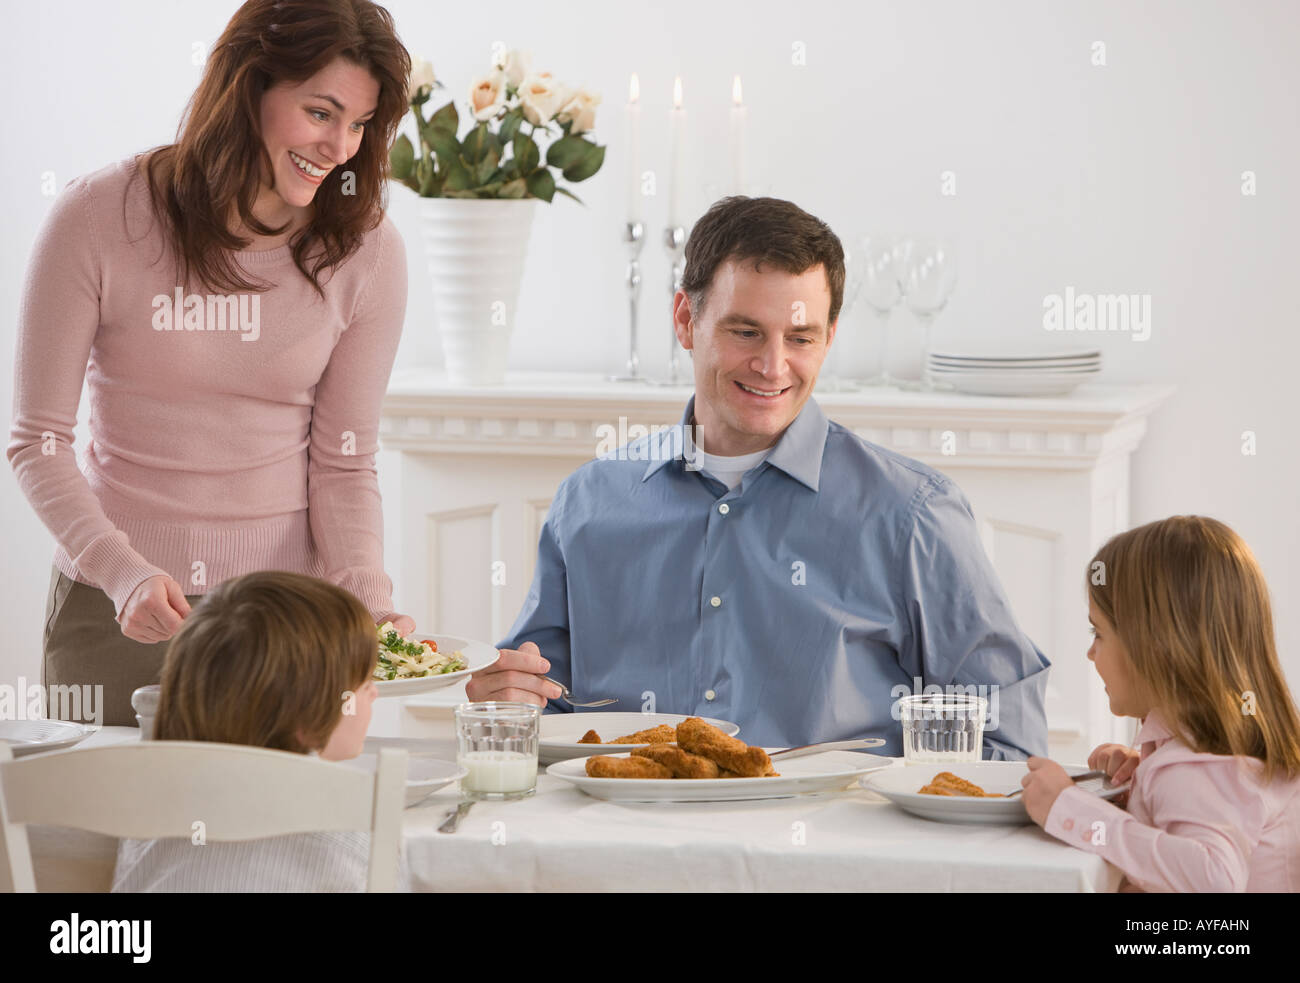 Family eating at dinner table Stock Photo